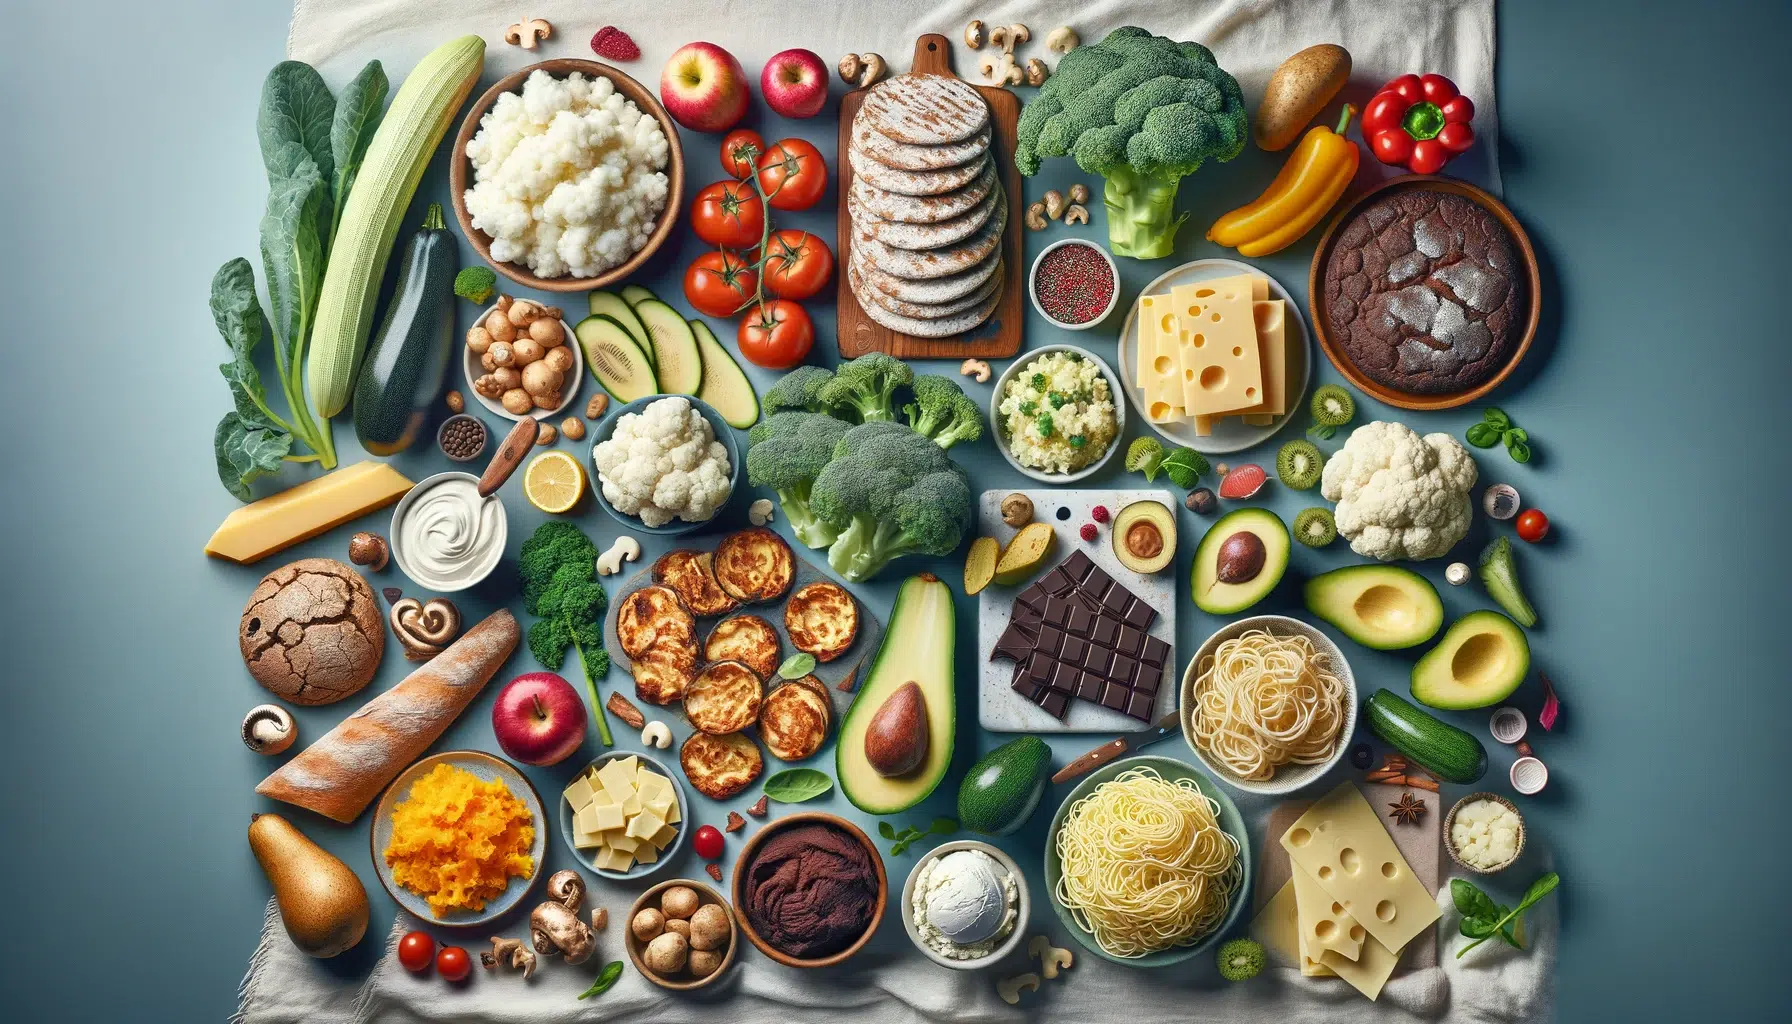 A visually captivating horizontal image featuring a variety of foods with almost zero carbohydrates. The image should